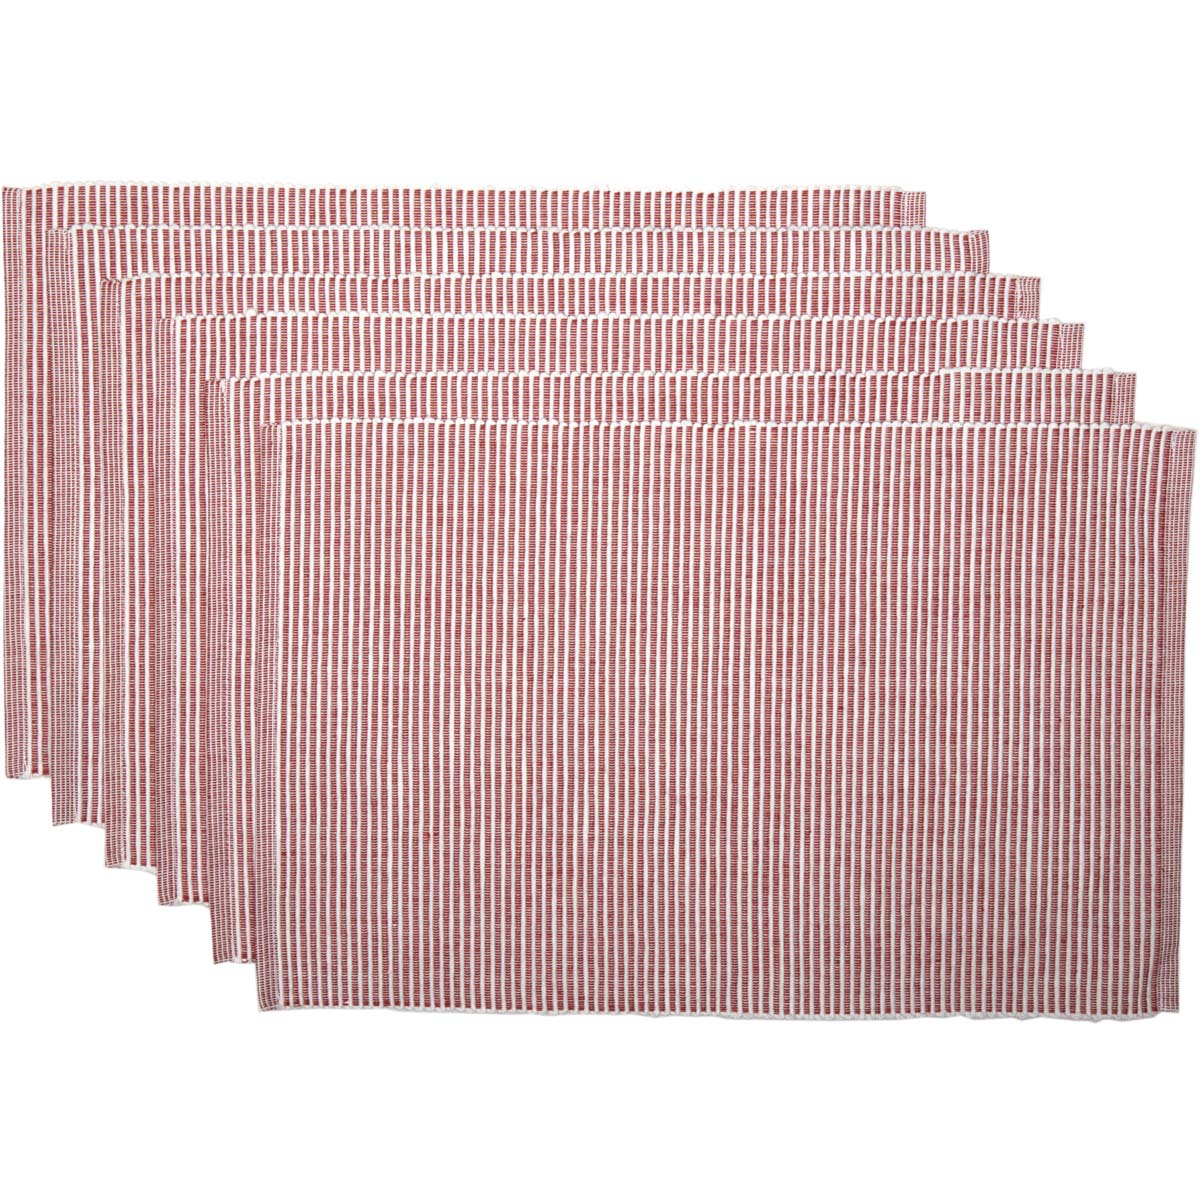 Ashton Rust Ribbed Placemat Set of 6 12x18 VHC Brands